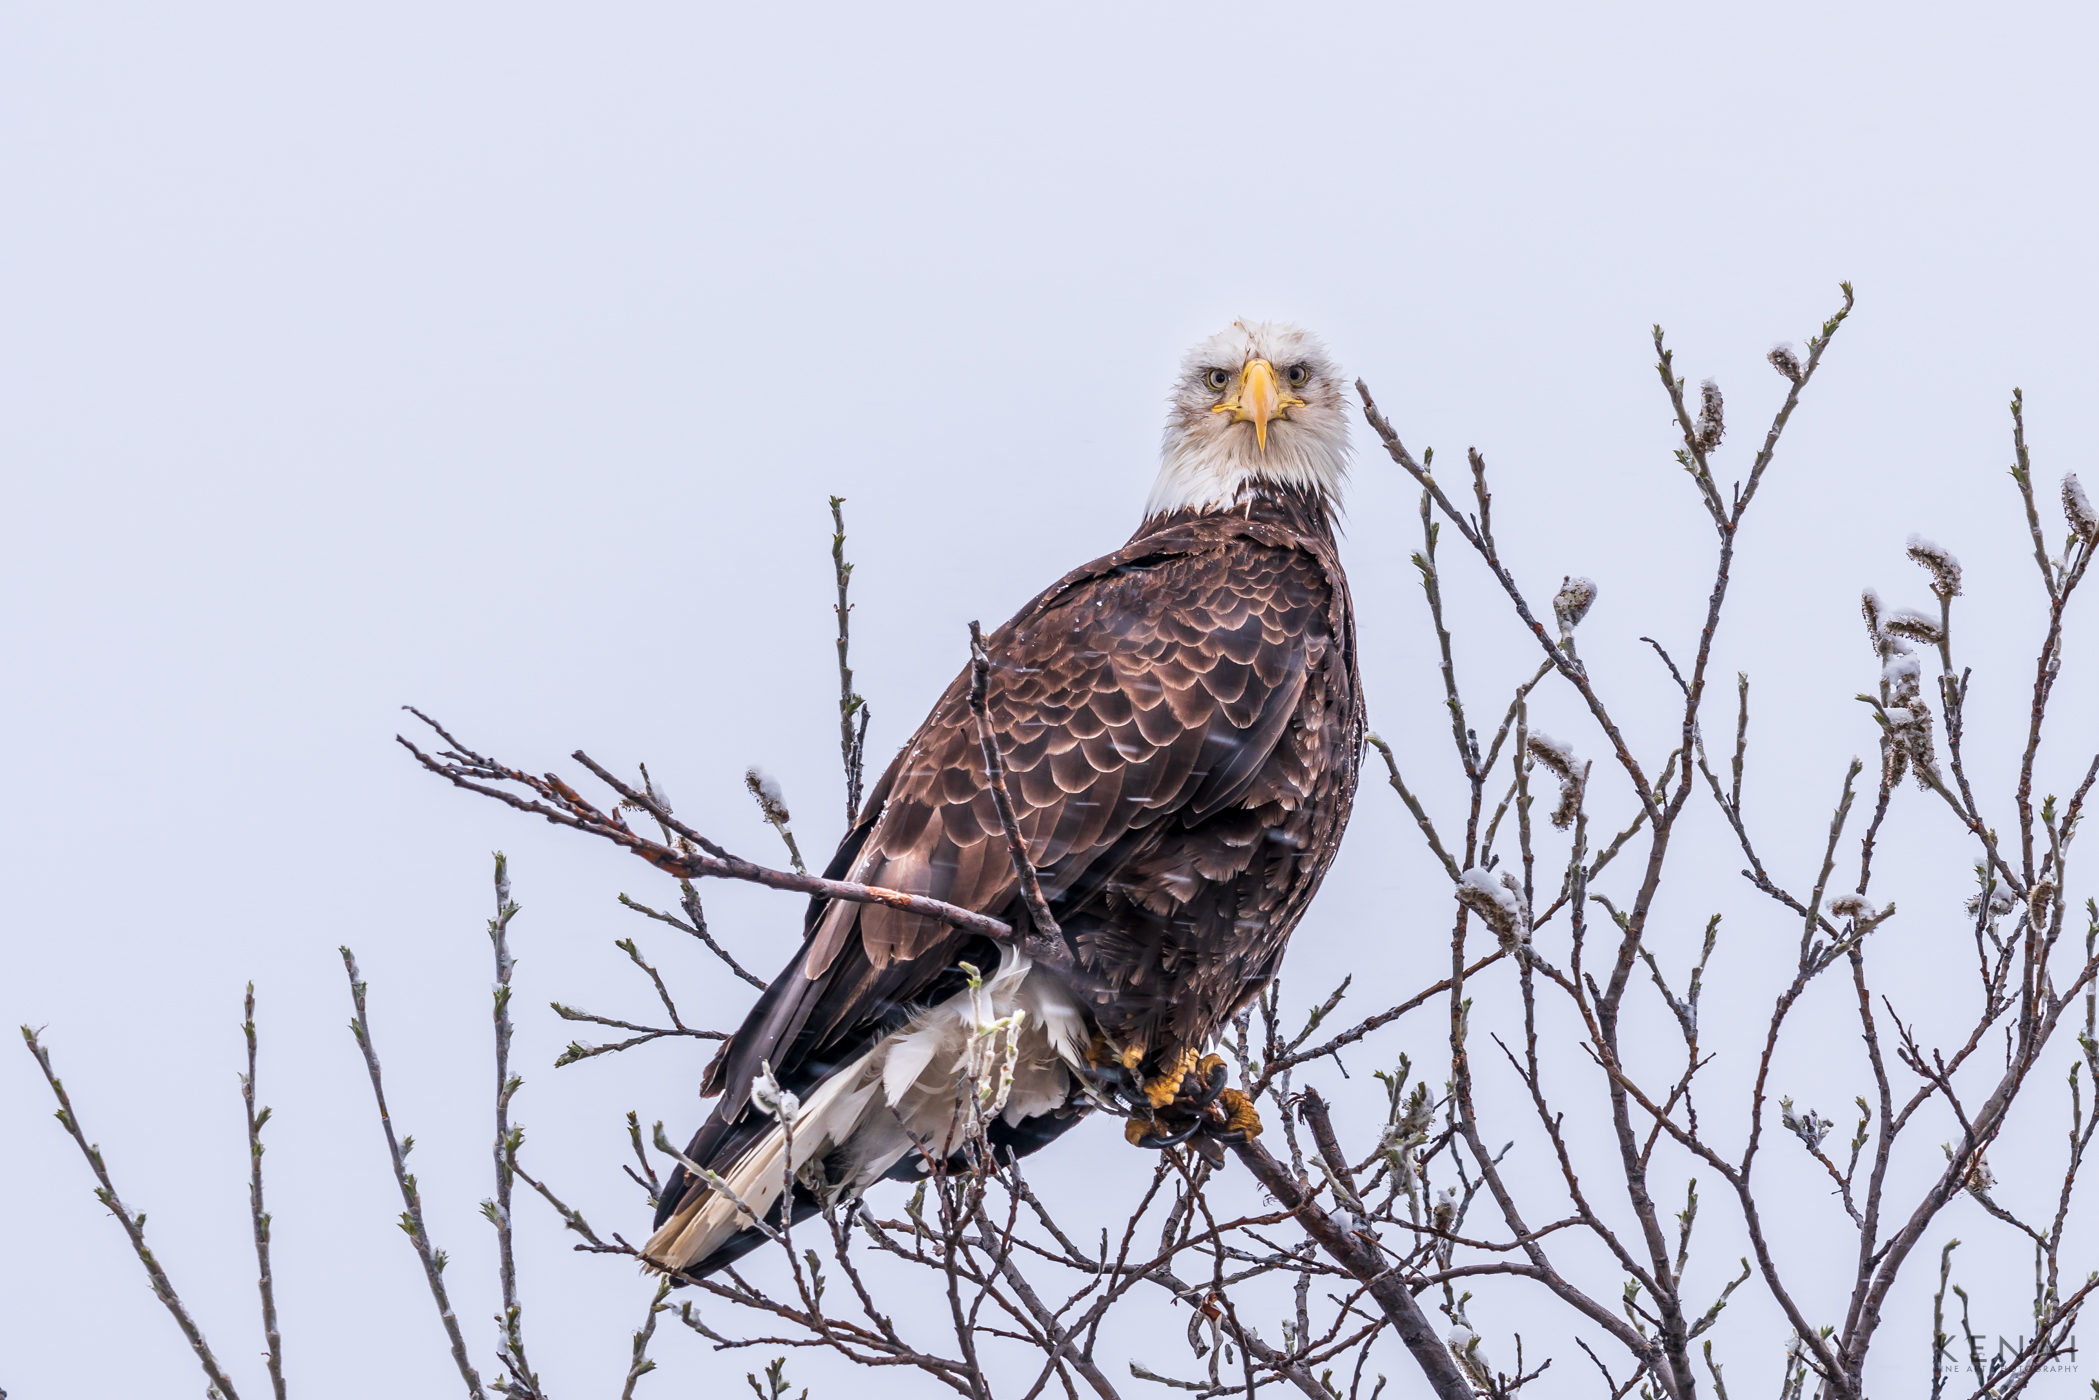 A lone bald eagle perched atop a barren tree, deep in the Alaskan winter. Have to admit... the icy stare was a little intimidating...